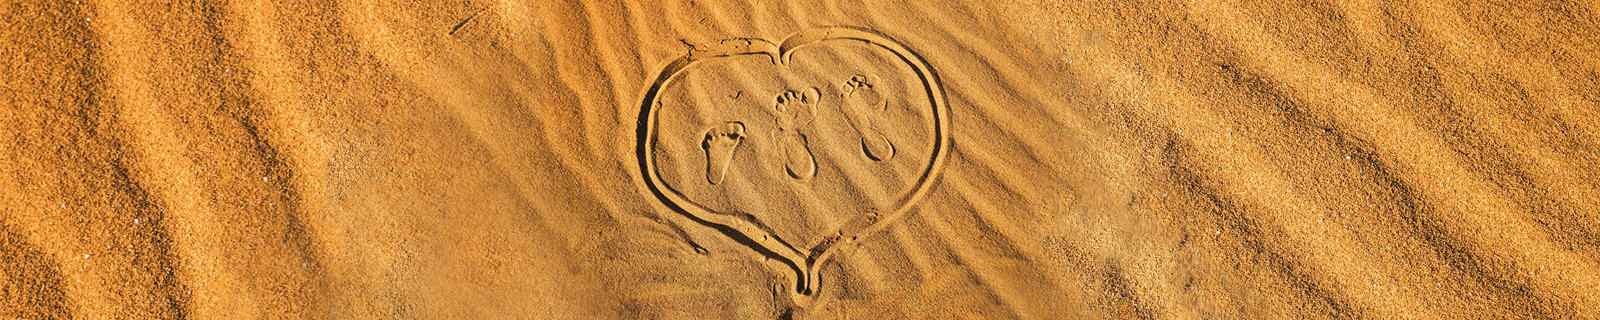 a heart shape with 2 adults and 1 kid's footprint on the sand